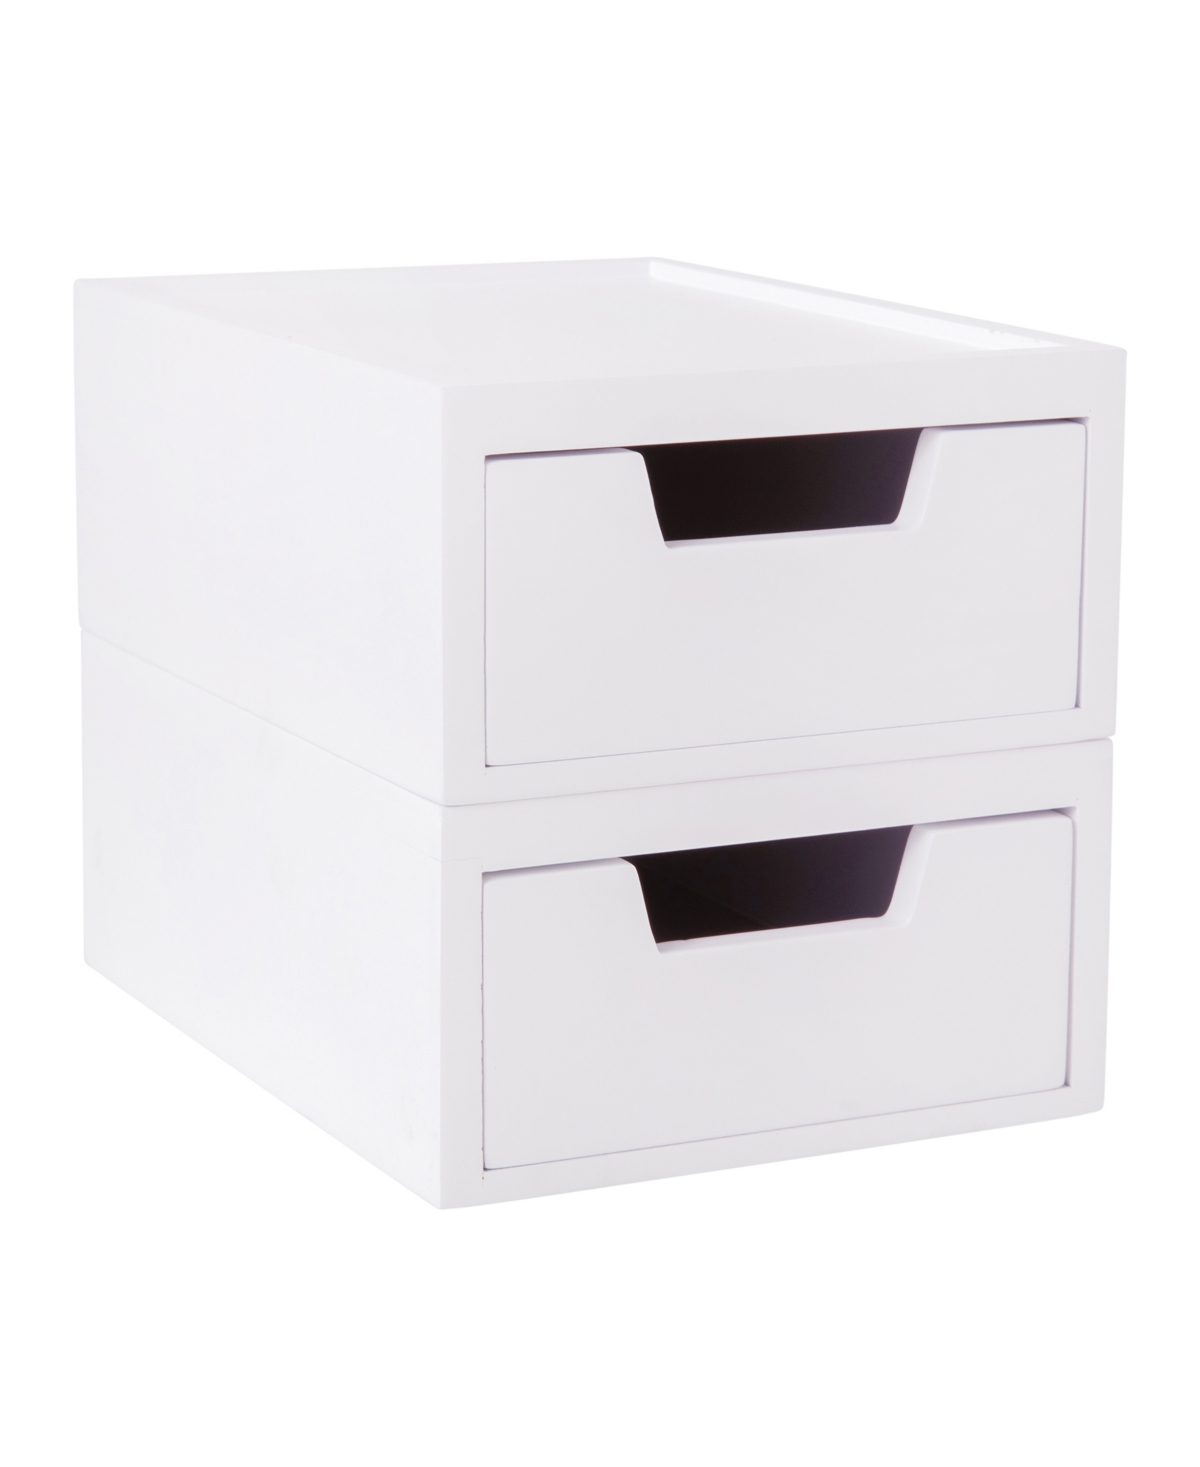 Weston 2 compartments Stackable Engineered Wood Boxes with Drawers, Office Desktop Organizers - White